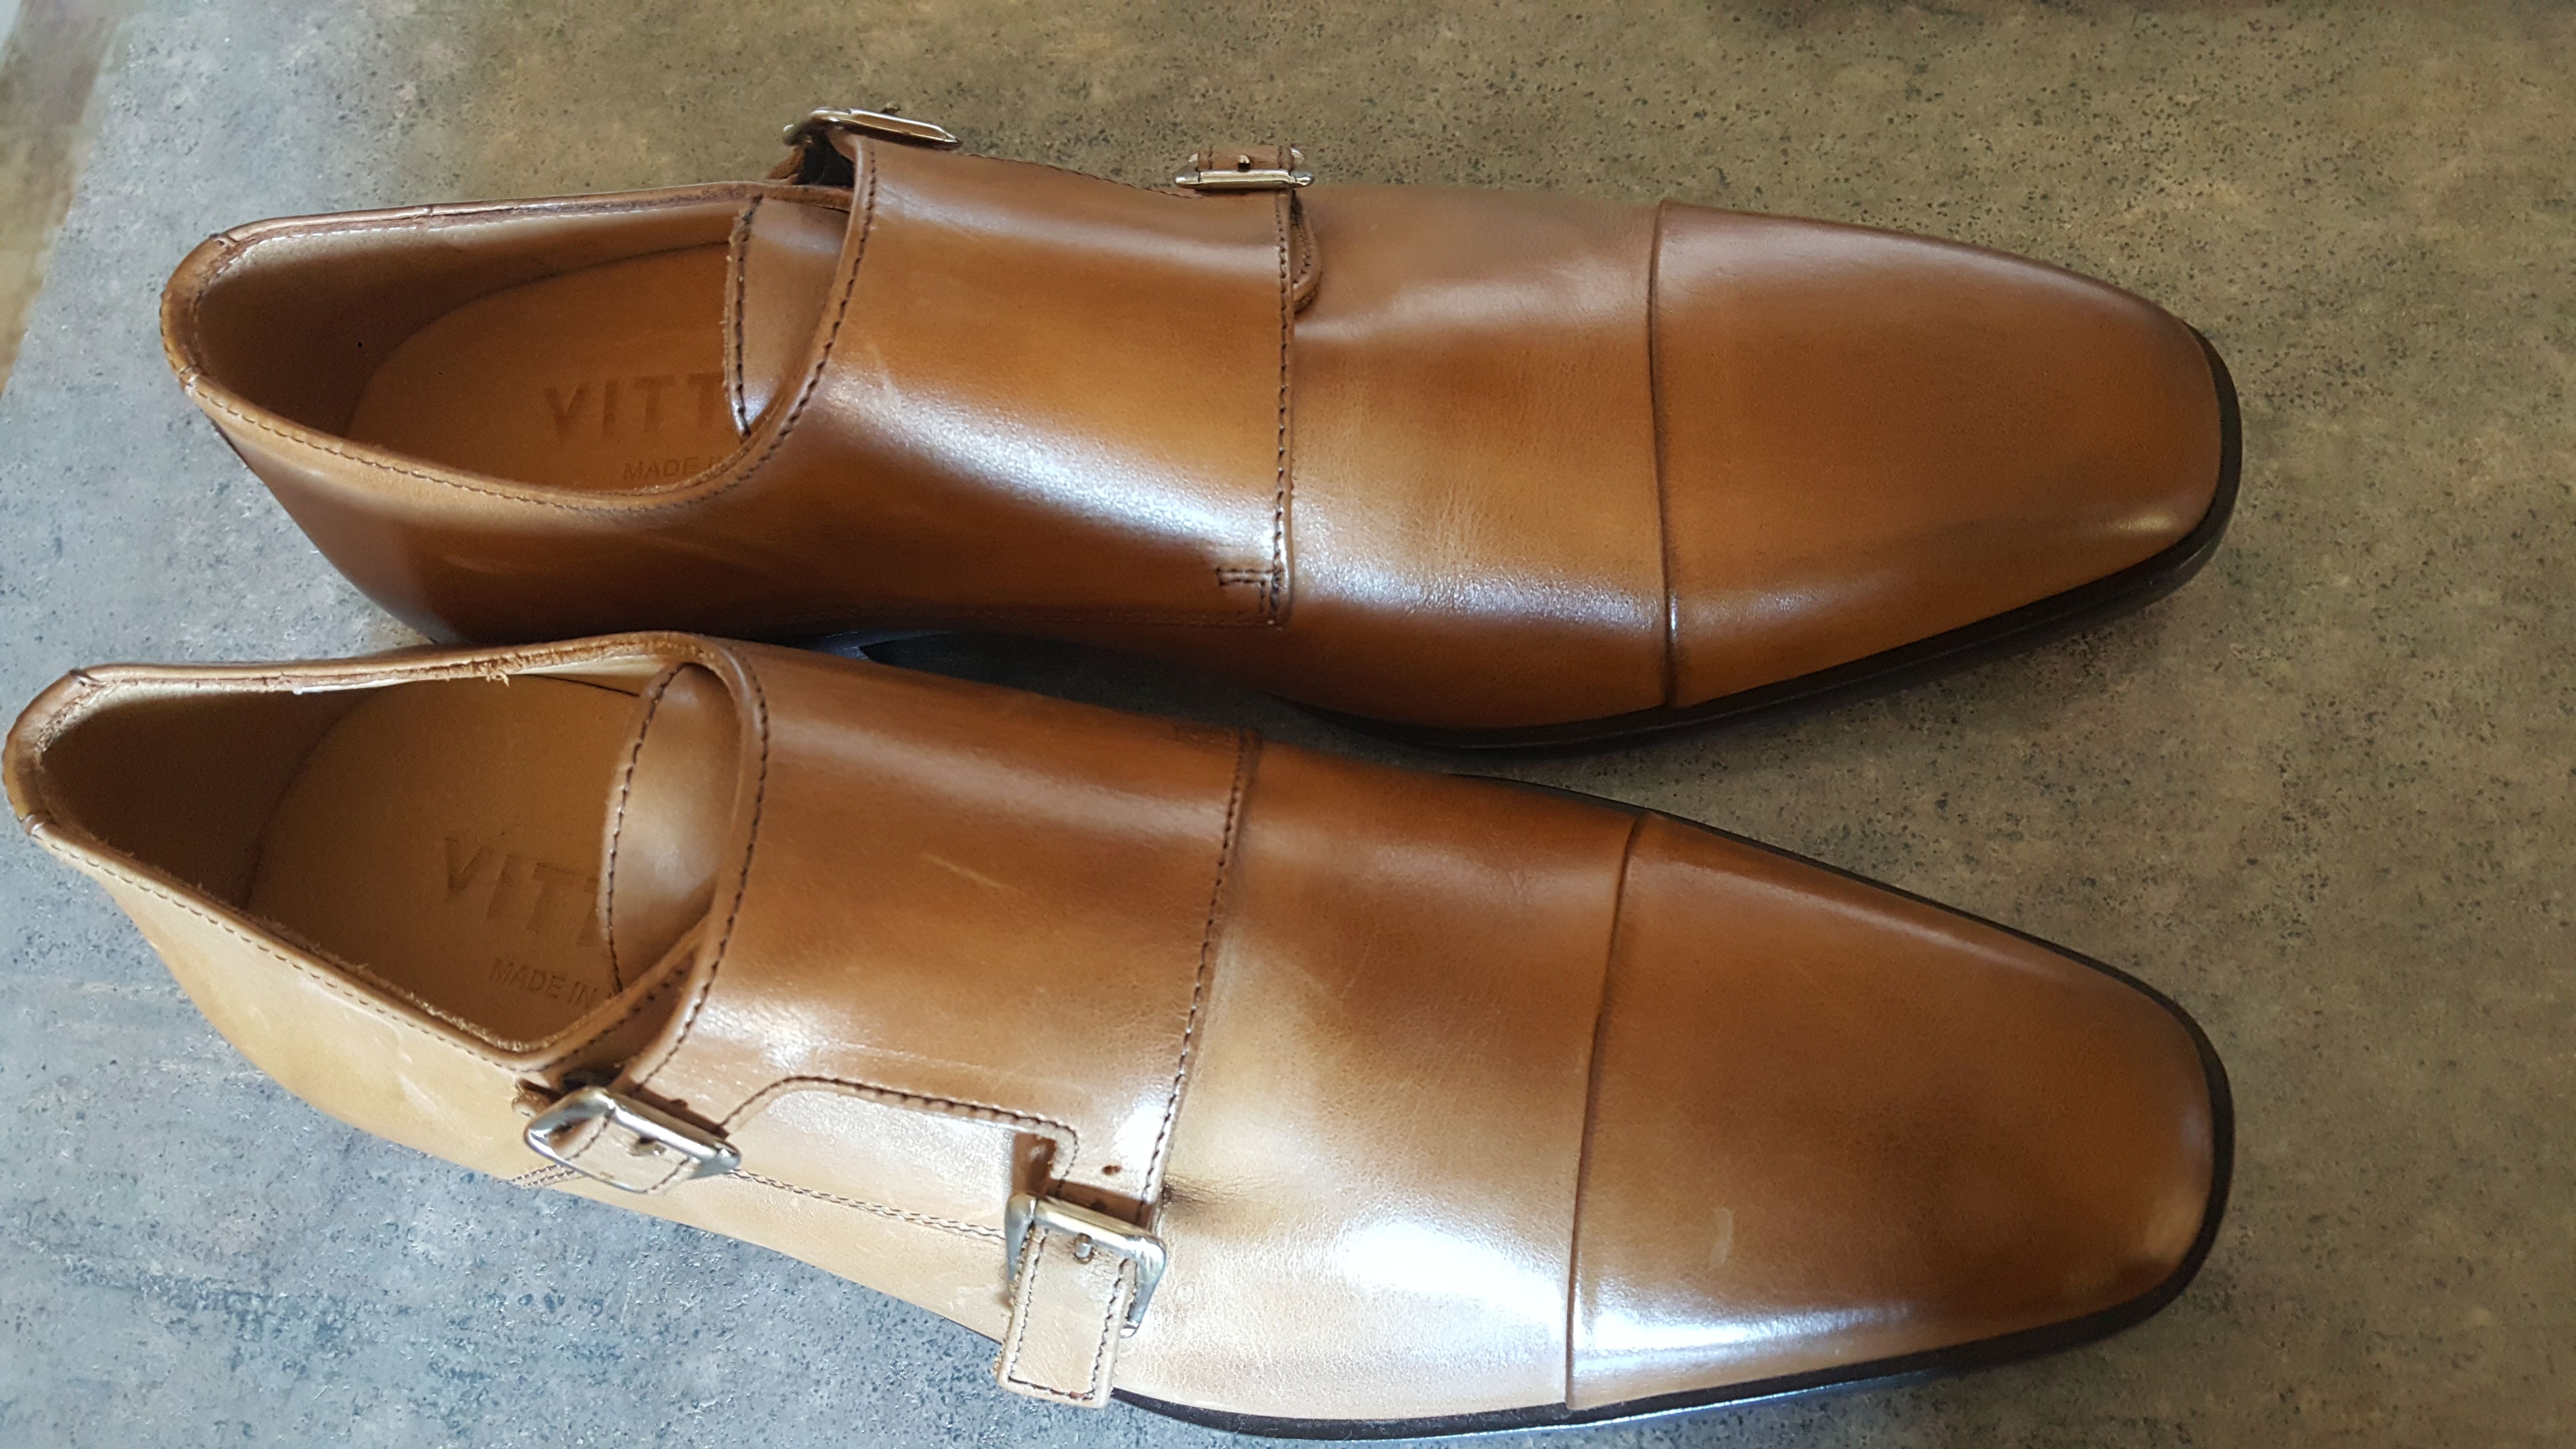 Vero Cuoio David Eden CUOIO ITALIAN MEN'S SHOES Made in ITALY from finest quality calf leather Size US 8.5 / EU 41-42 - 1 Preview